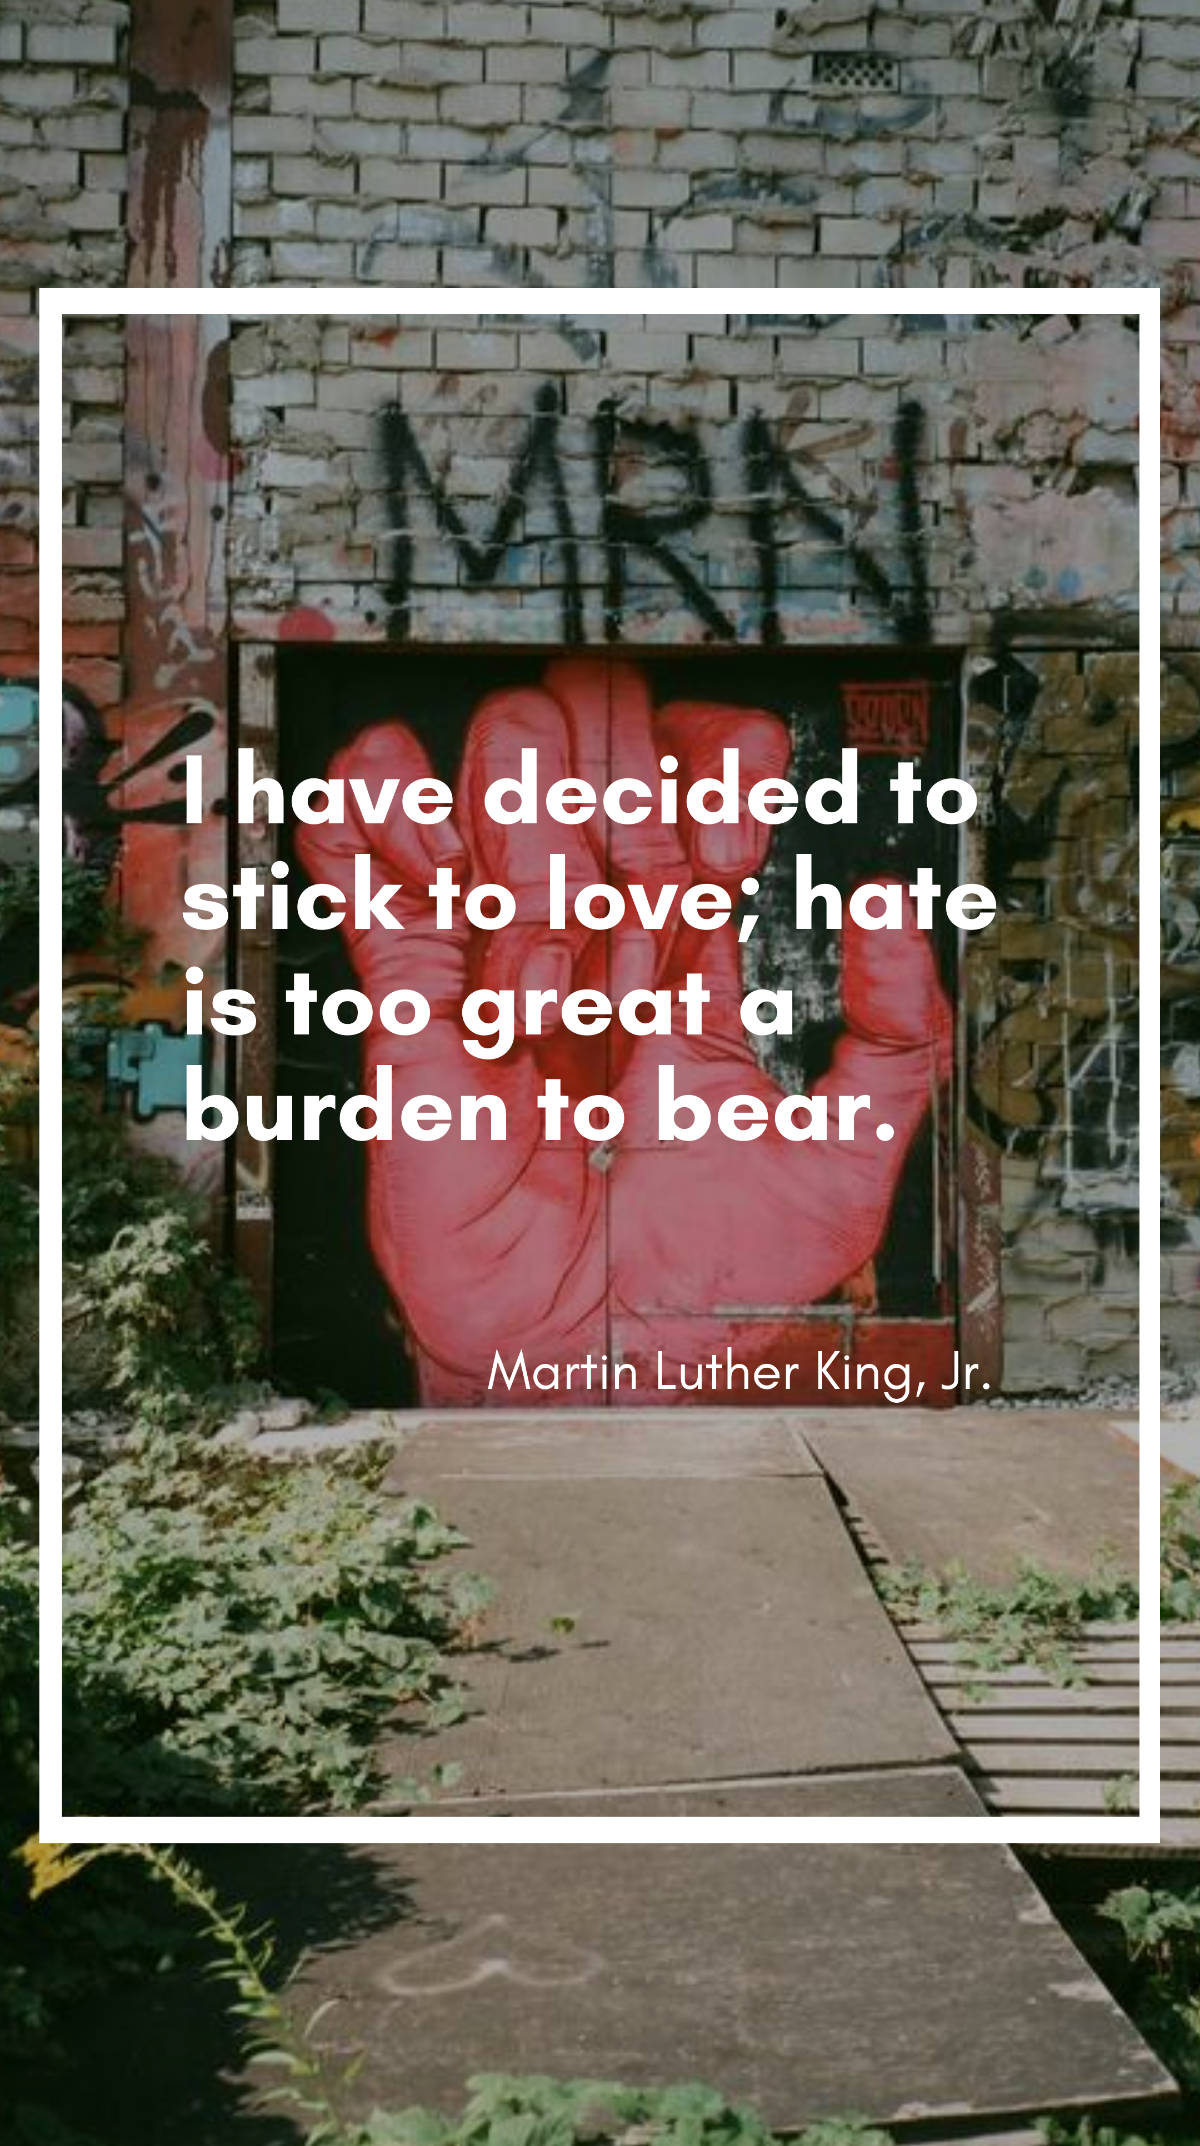 Martin Luther King, Jr. - “I have decided to stick to love; hate is too great a burden to bear.”